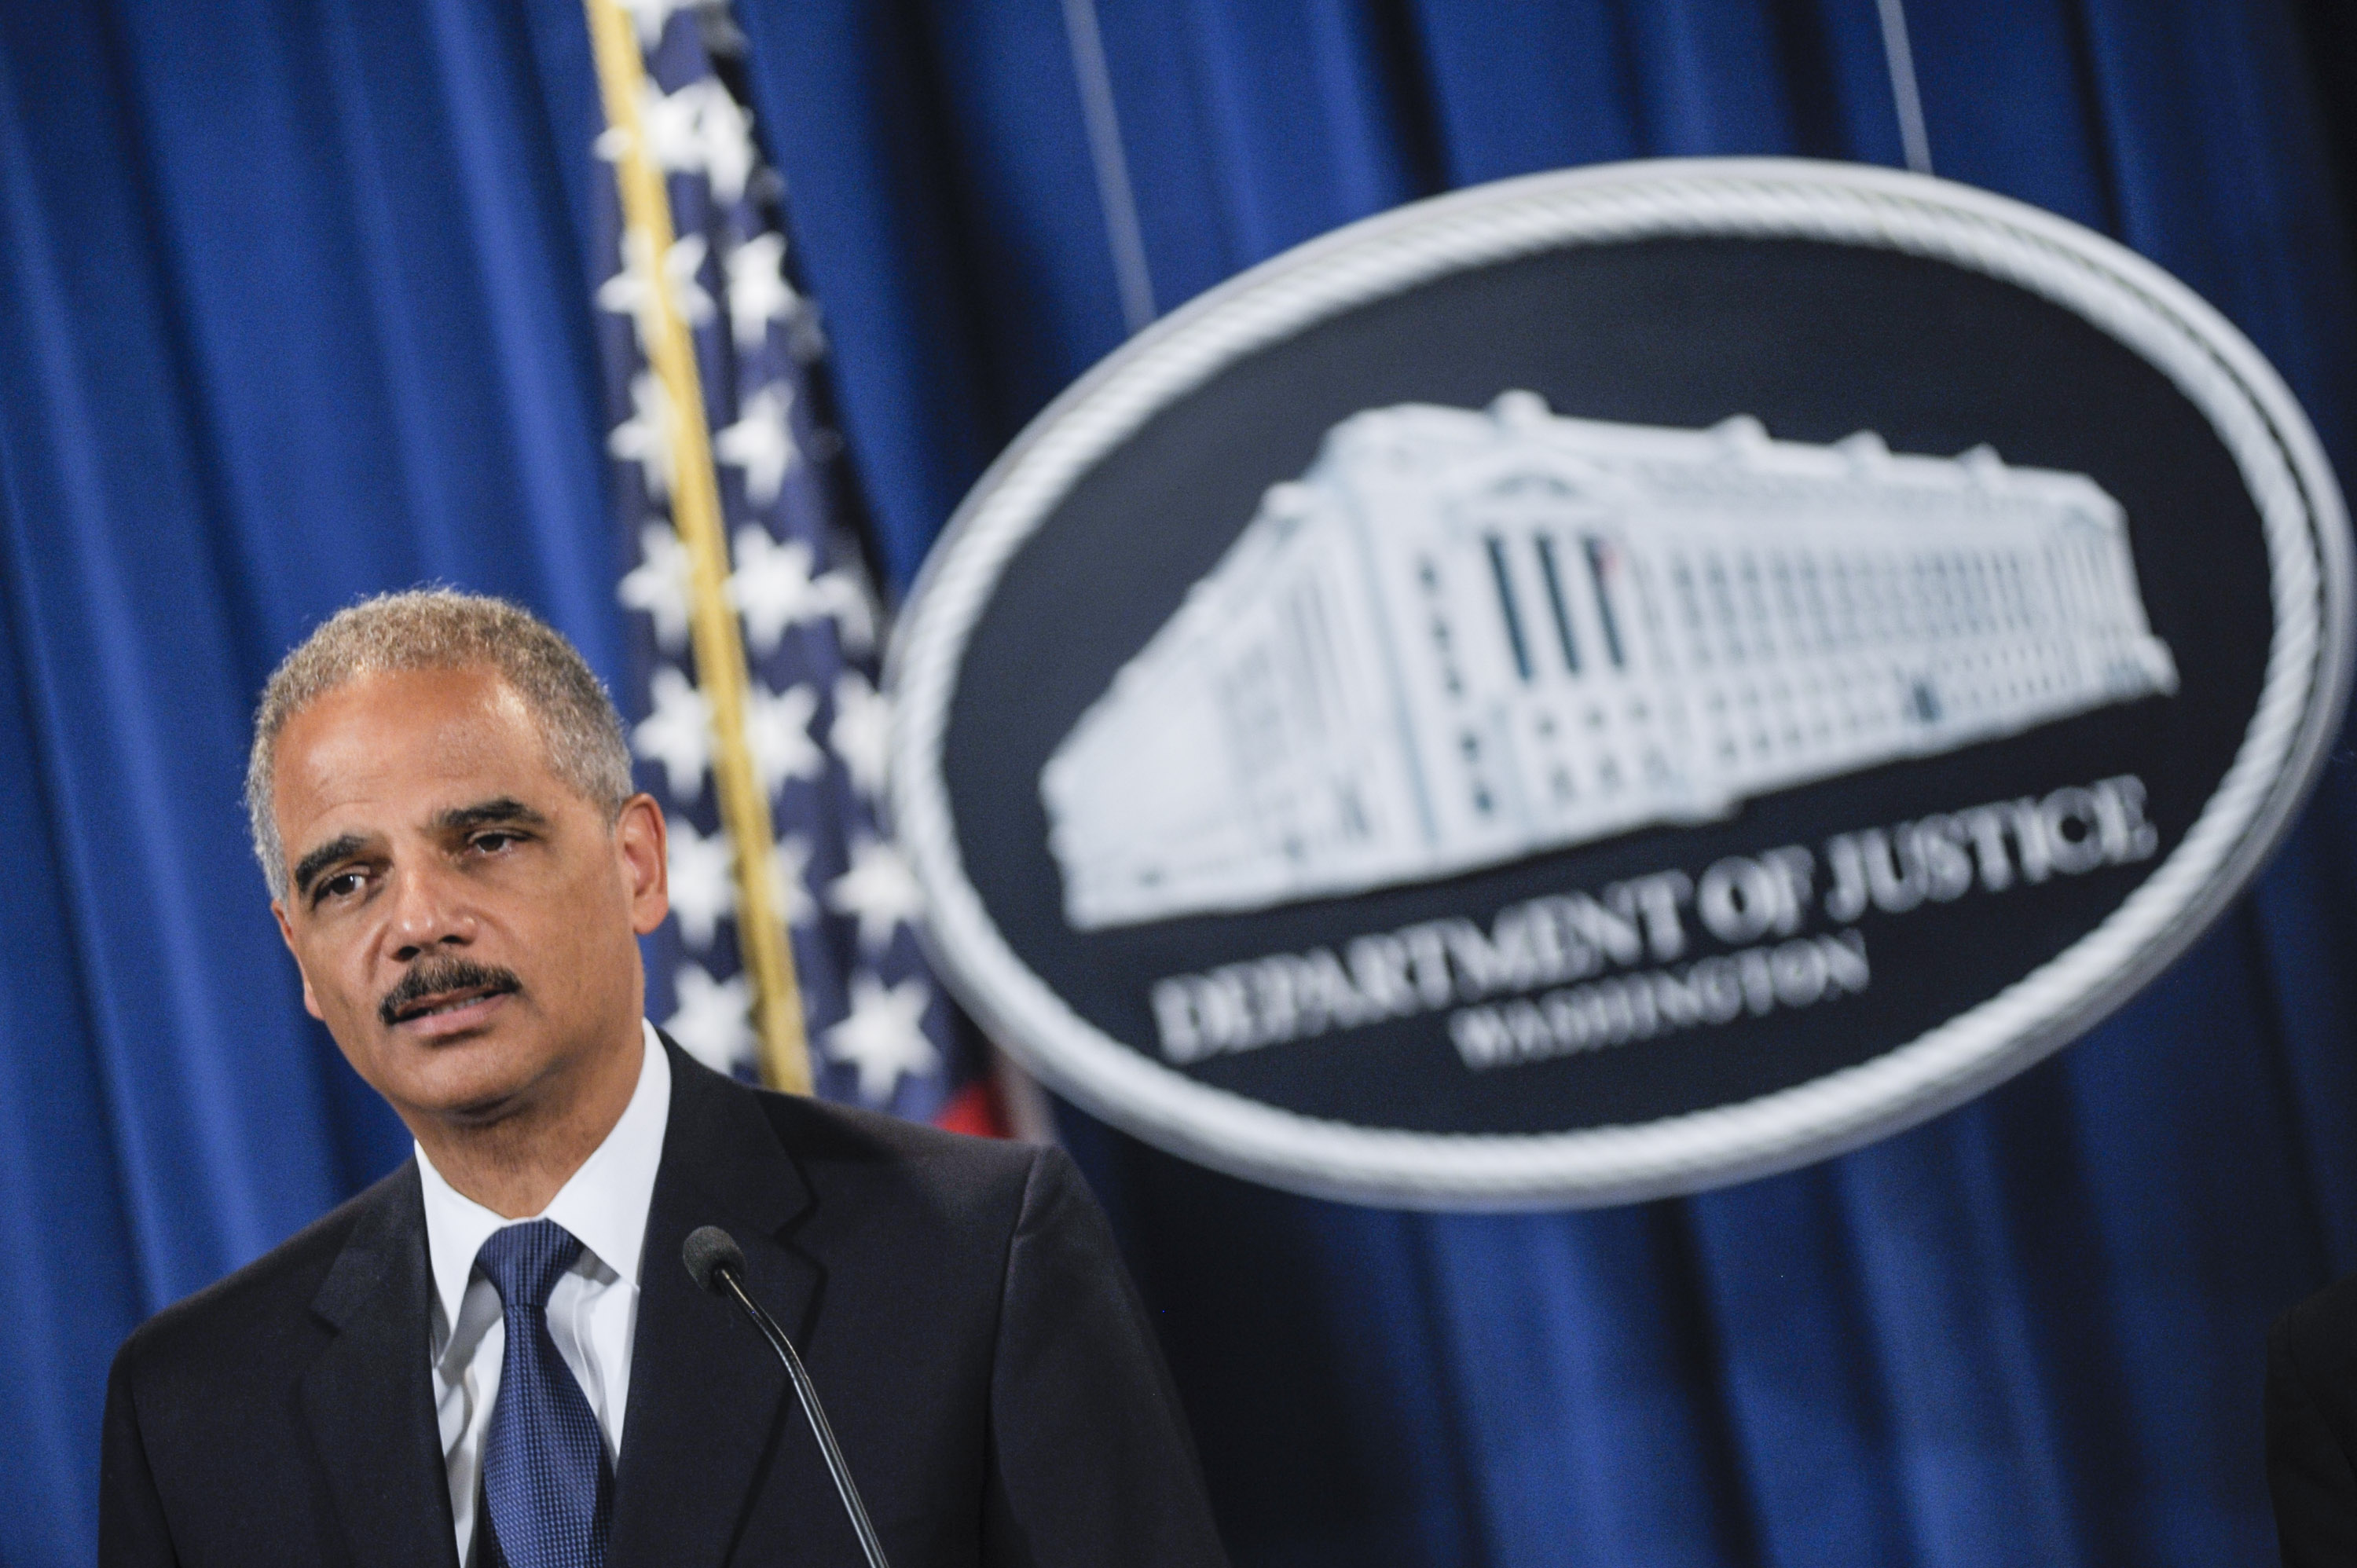 U.S. Attorney General Eric Holder speaks during a press conference announcing Department of Justice plans to sue North Carolina over Voter ID regulations at the Department of Justice on September 30, 2013 in Washington, D.C. (Kris Connor&mdash;Getty Images)